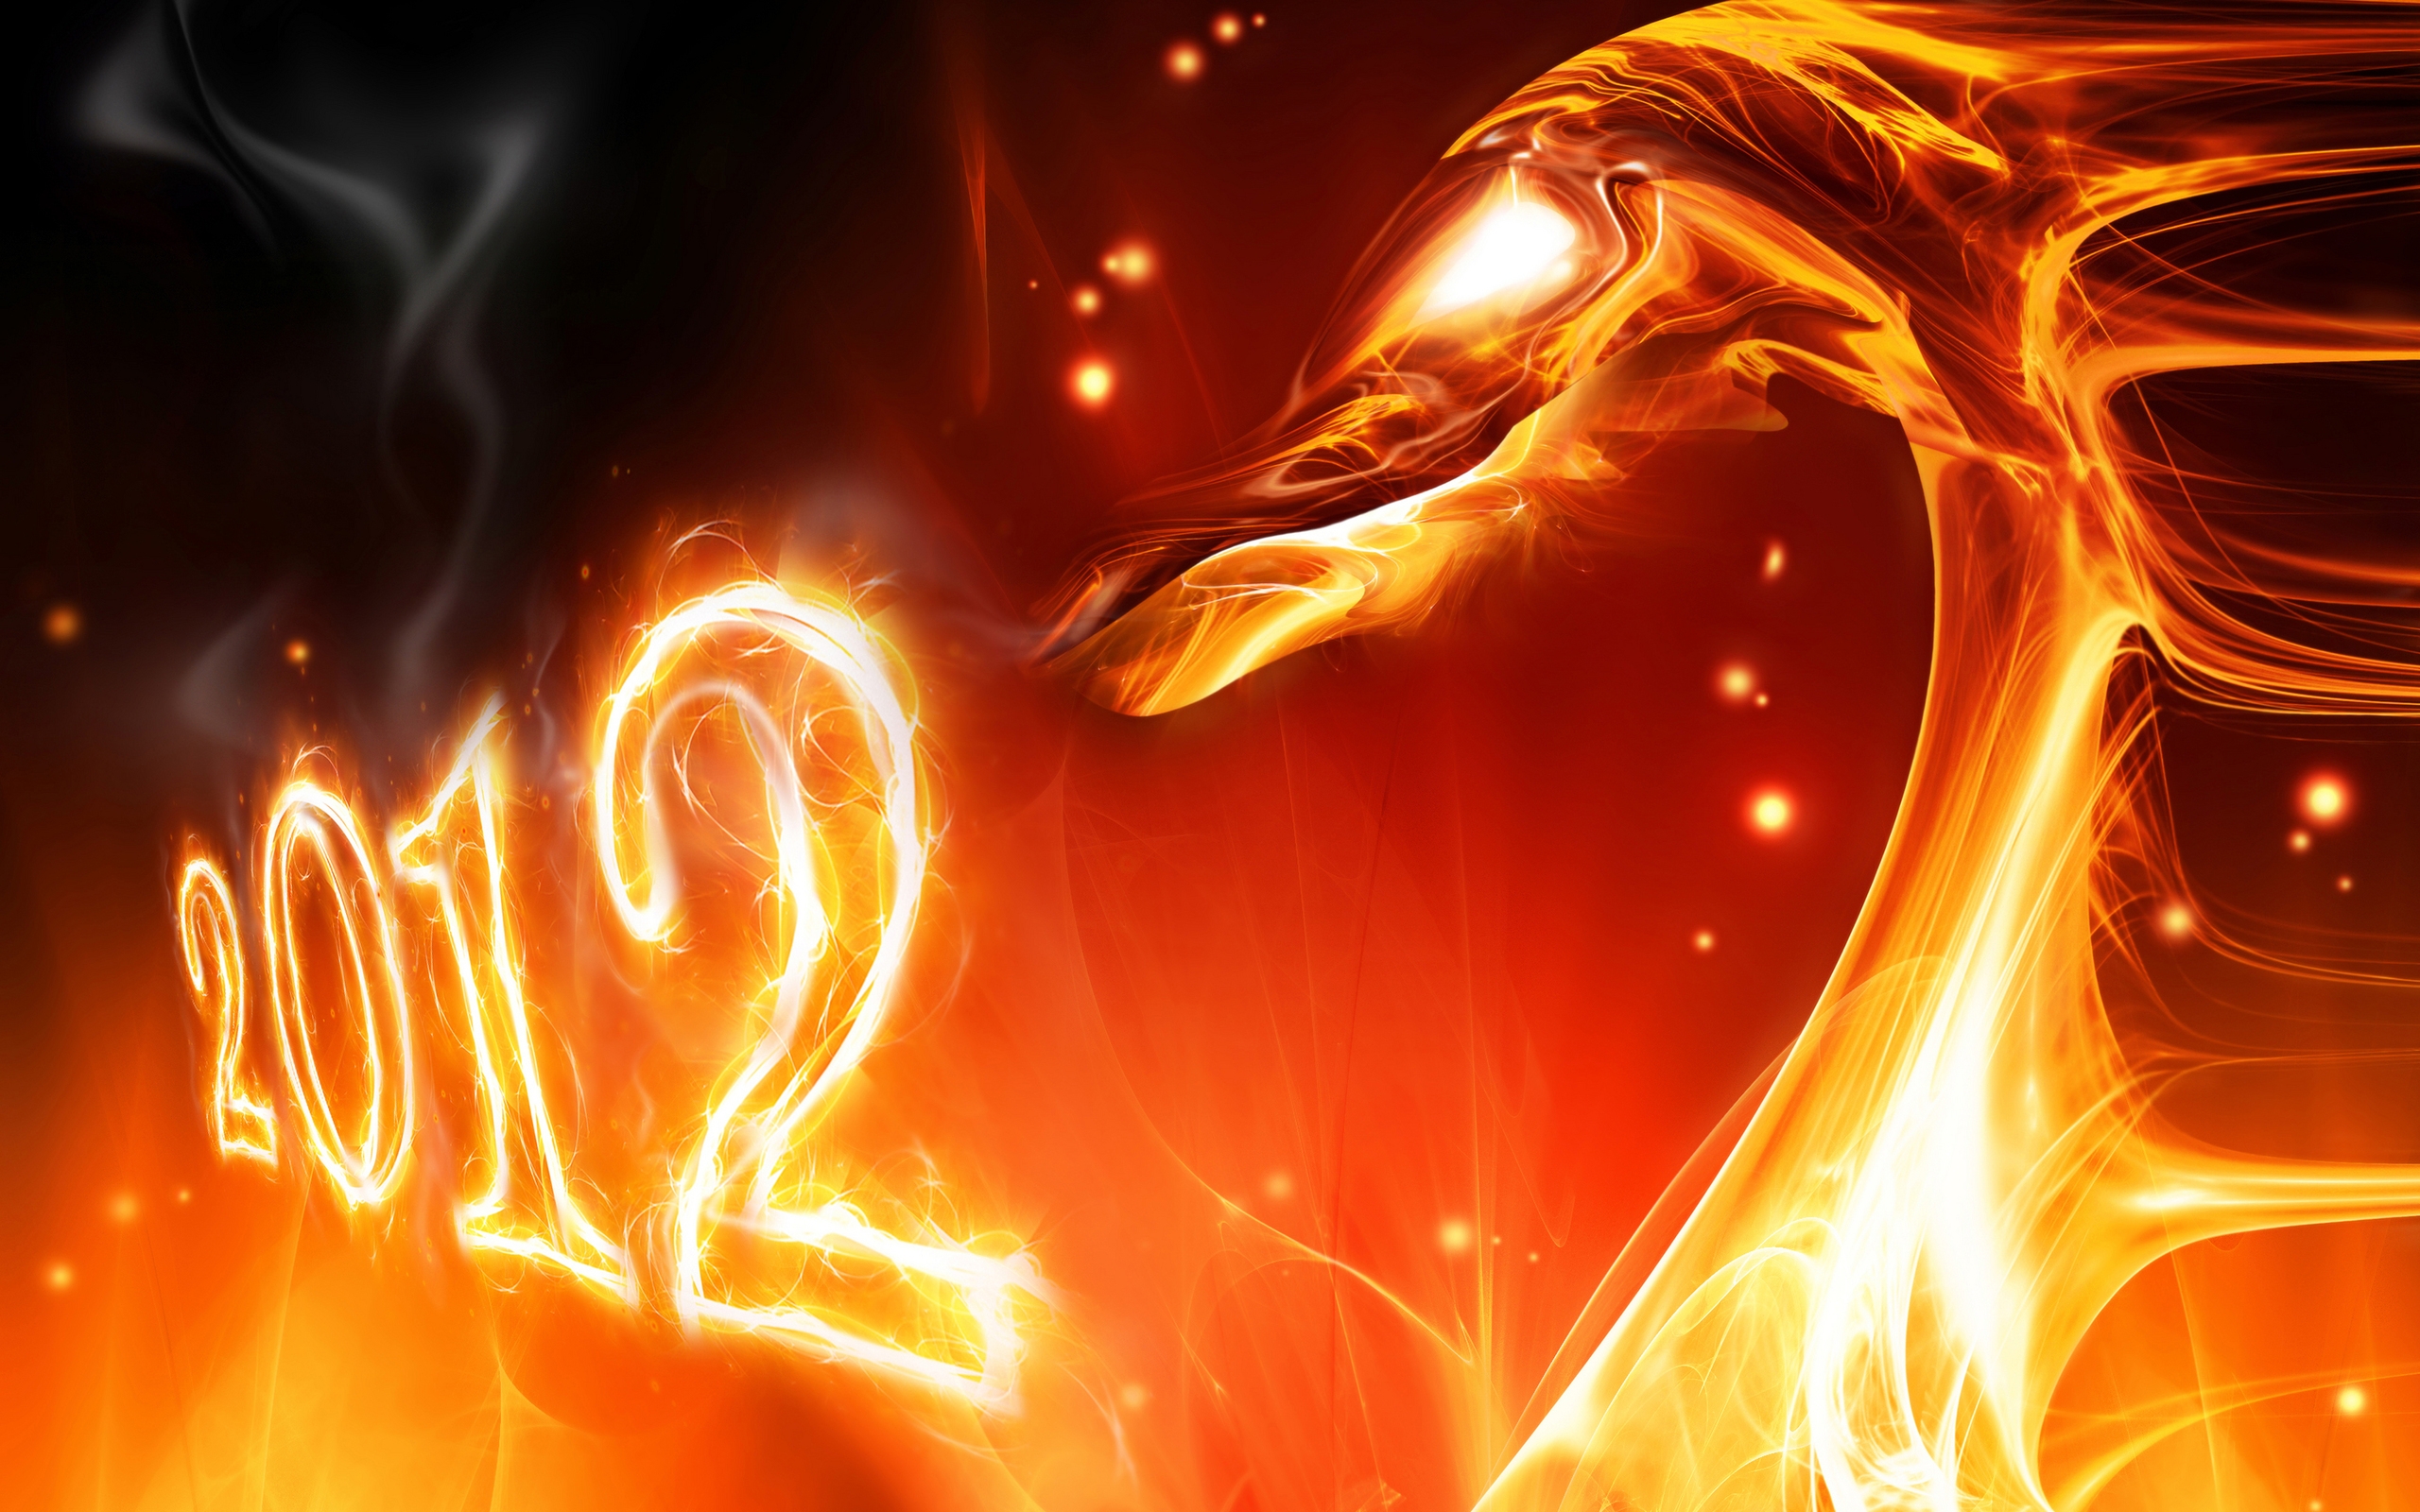 2012 Dragon Year for 2560 x 1600 widescreen resolution